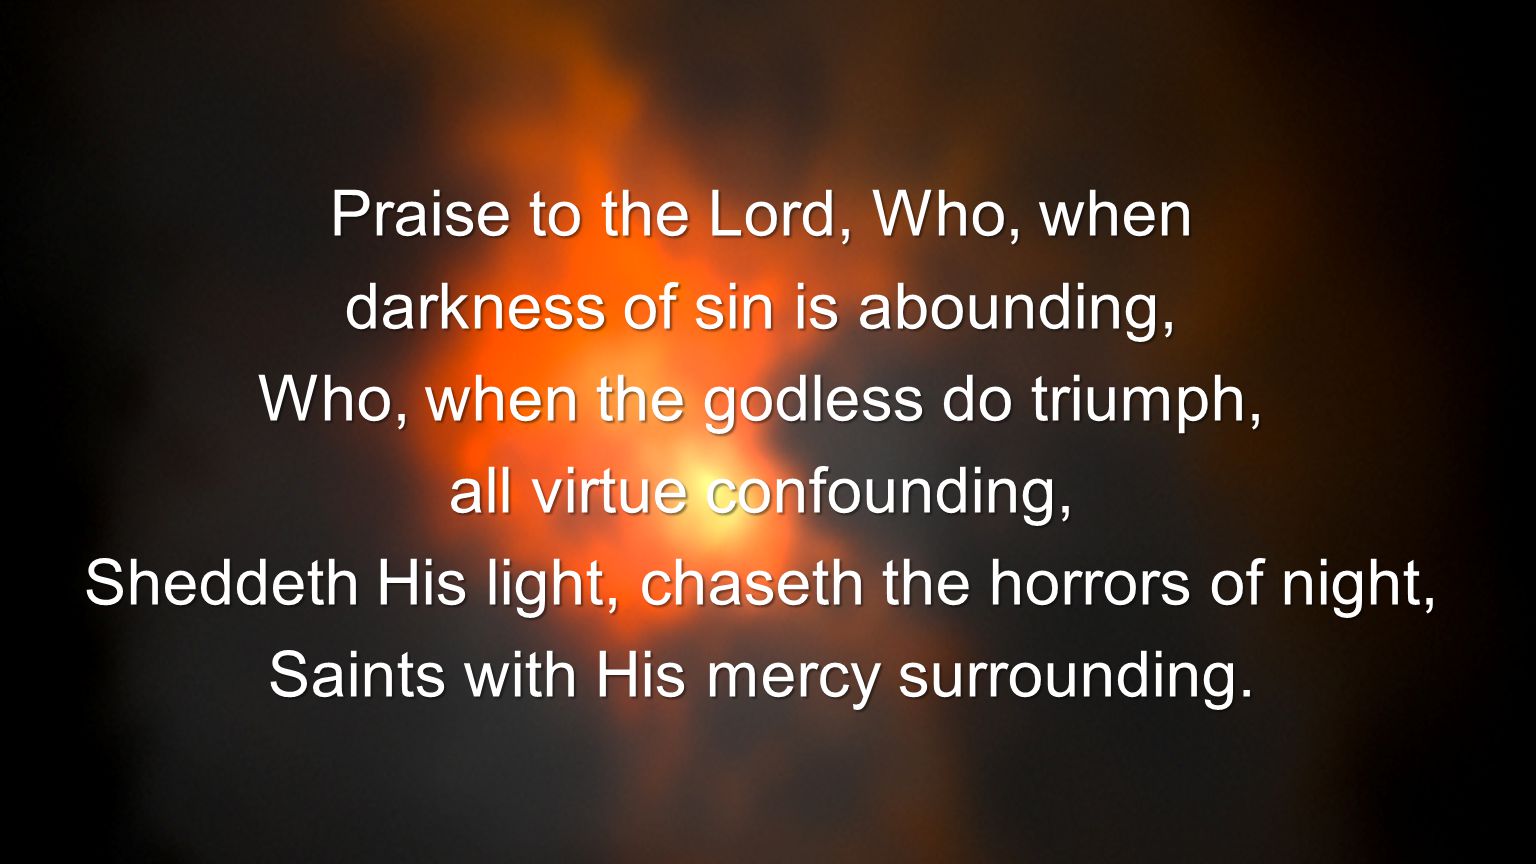 Praise to the Lord, Who, when darkness of sin is abounding,